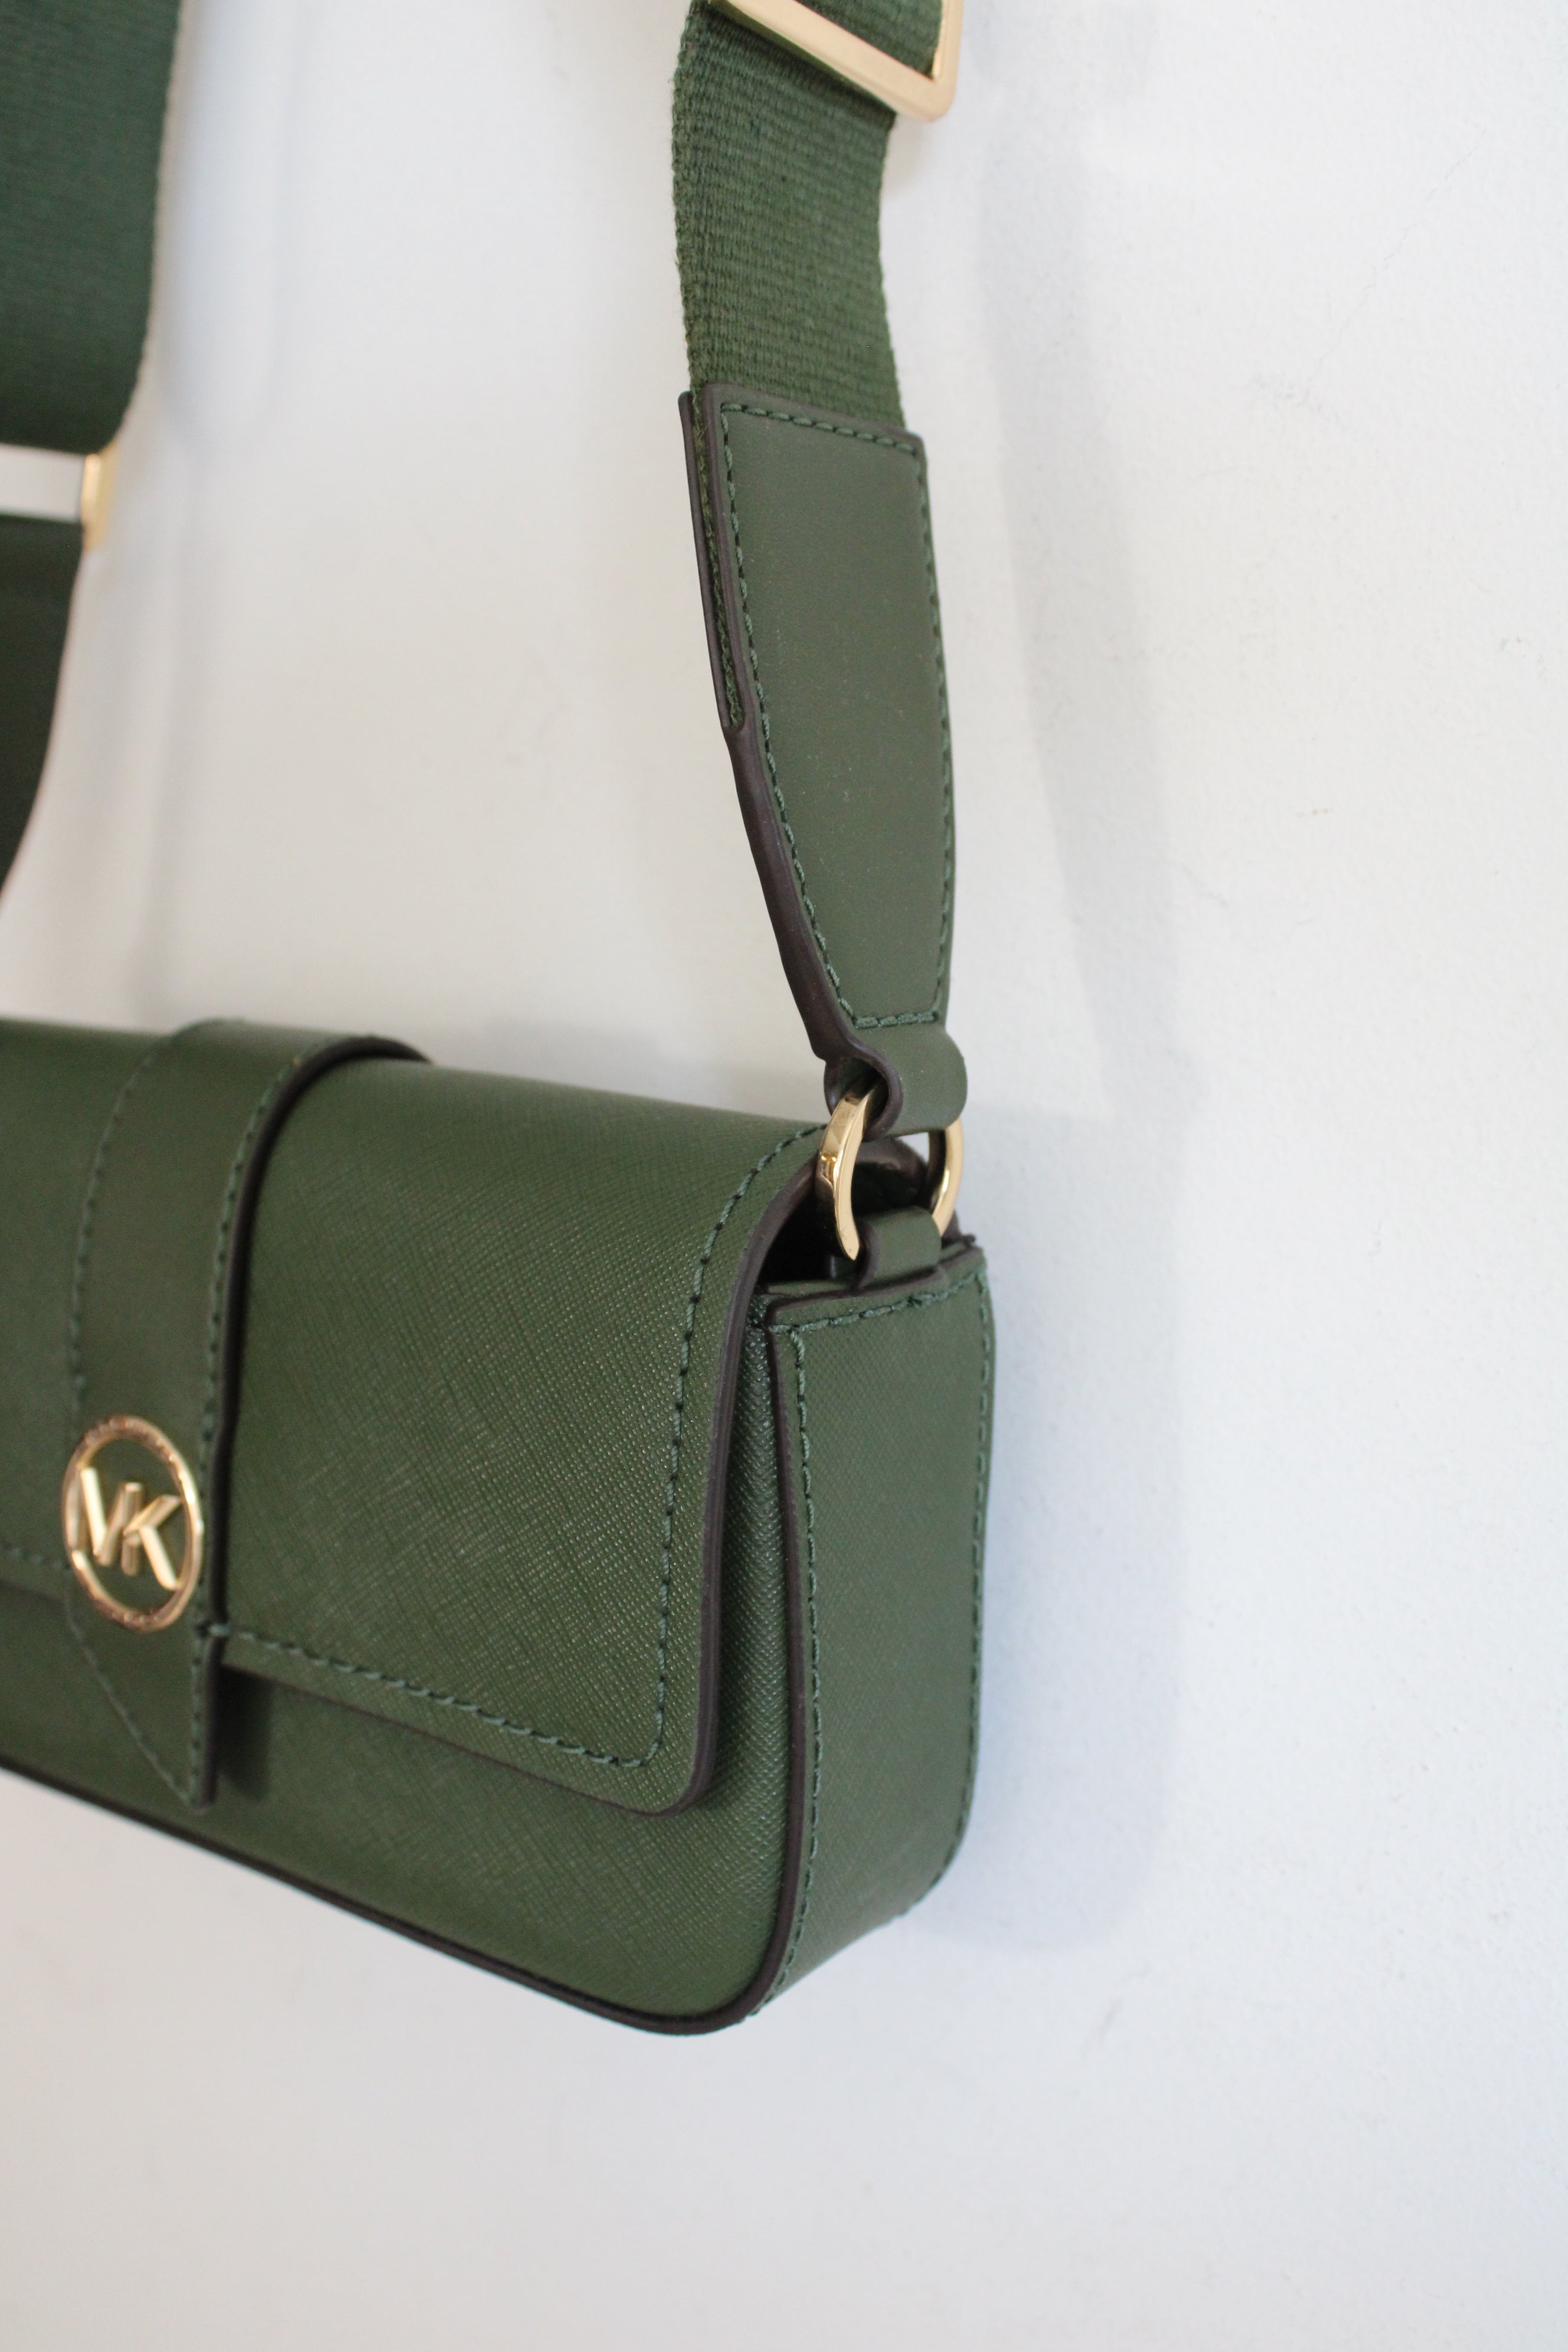 NEW Michael Kors Tracolla Greenwich Olive Army Green Mini Shoulder Bag